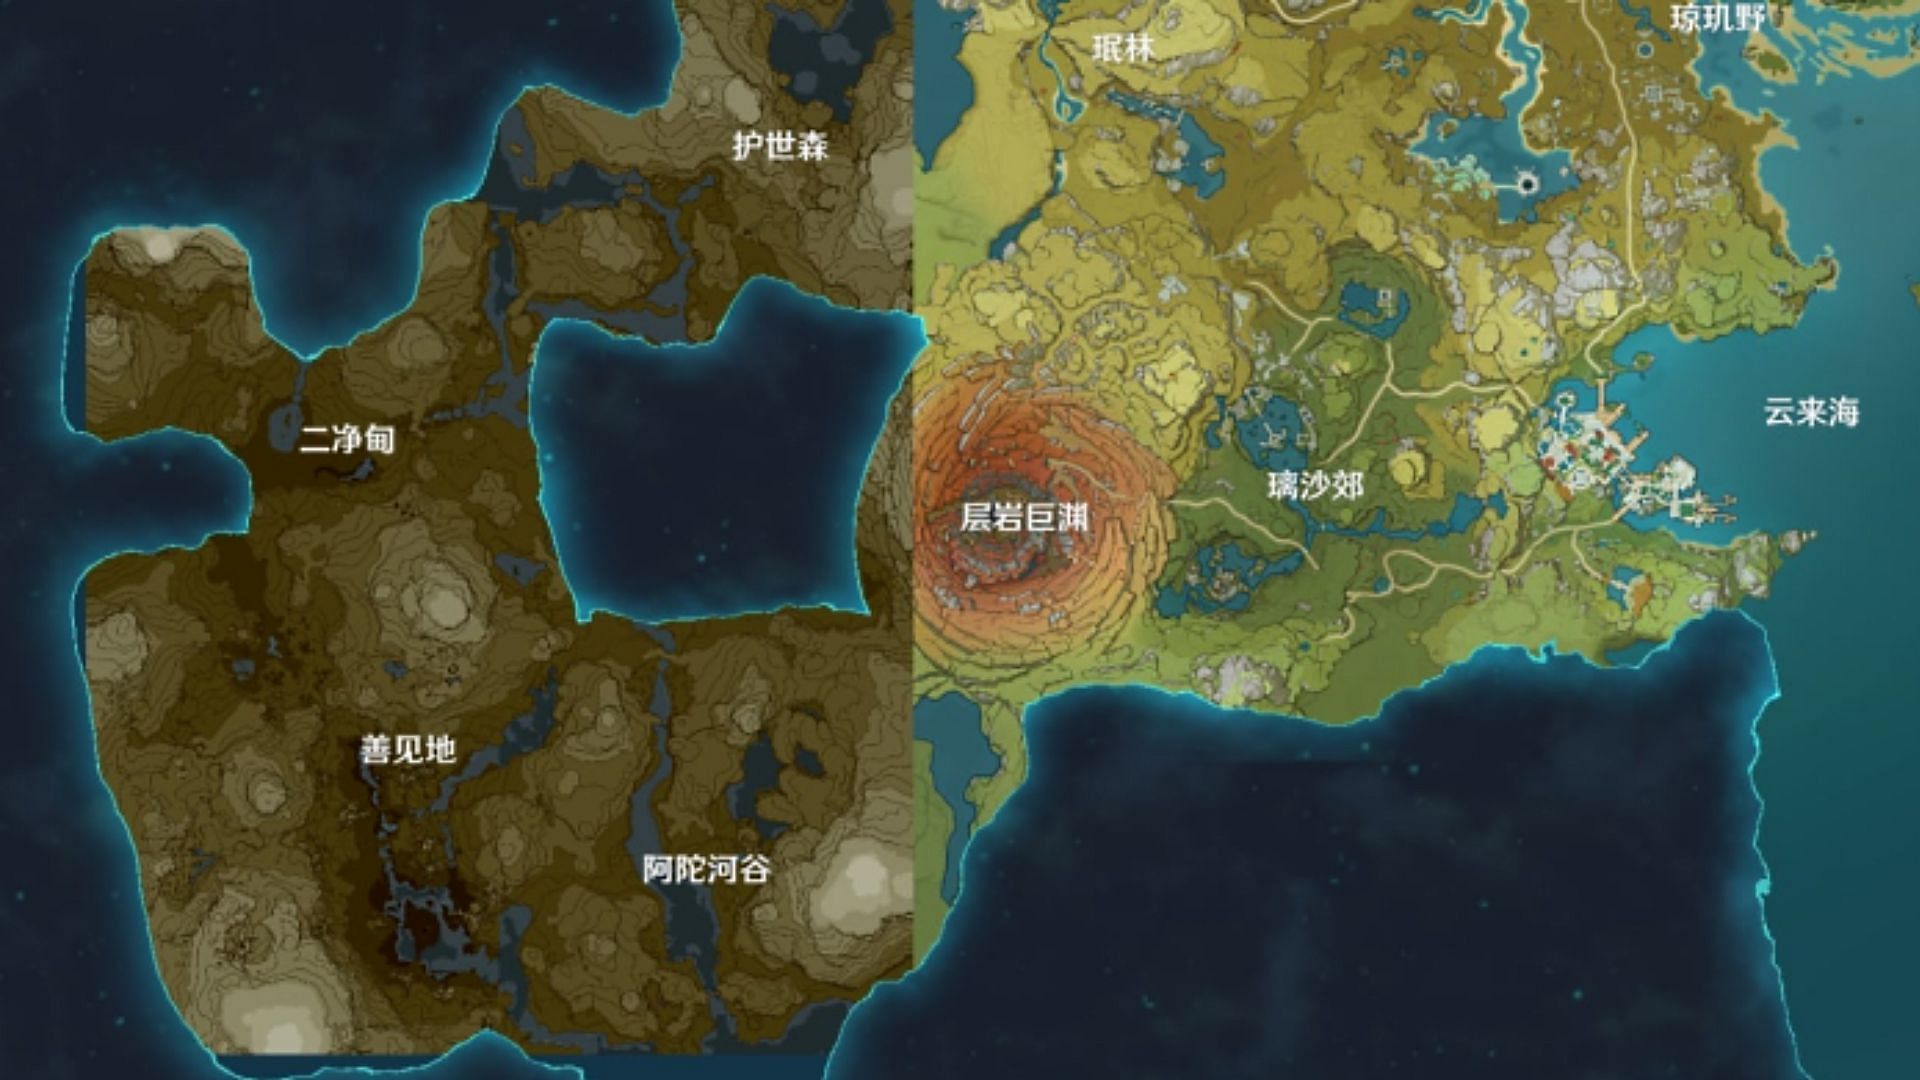 Upcoming Genshin Impact map Sumeru leaked ahead of official tease